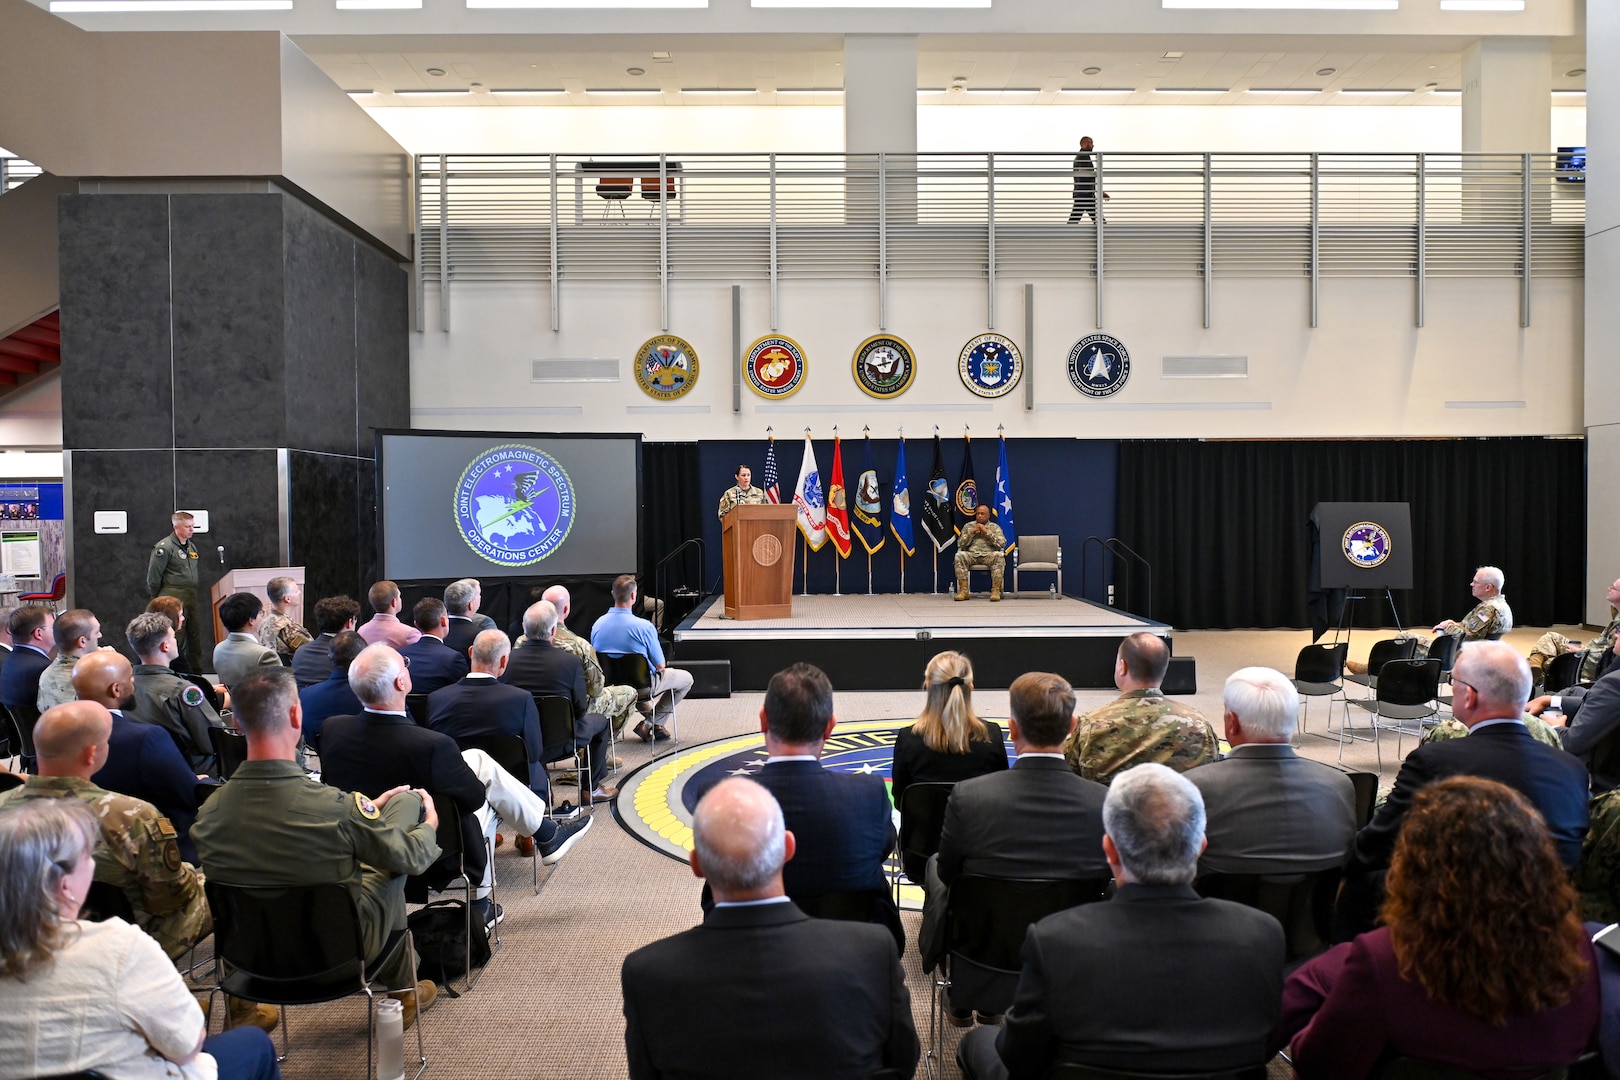 U.S. Strategic Command (USSTRATCOM) officially stood up the Joint Electromagnetic Spectrum (EMS) Operations Center (JEC) during a ceremony at USSTRATCOM today.
The JEC will serve as the heart of the Department of Defense's Electromagnetic Spectrum Operations with the primary goal of restructuring accounts for force management, planning, situation monitoring, decision-making, and force direction.